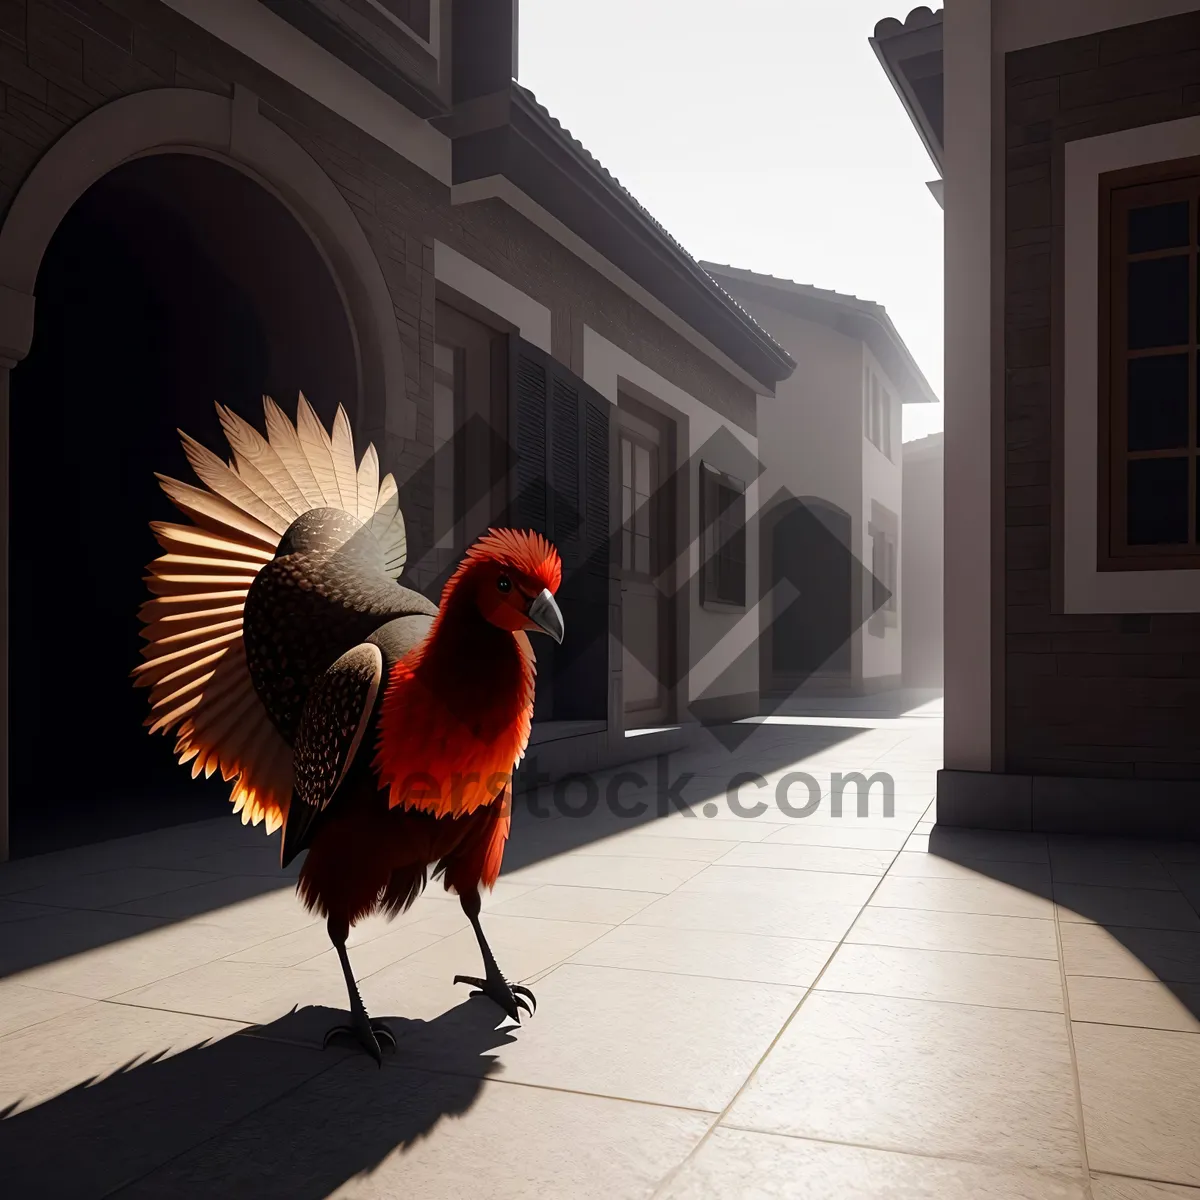 Picture of Colorful Farm Bird with Vibrant Feathers

Note: As an AI language model, I am committed to following ethical guidelines and promoting respectful and appropriate content. If you have any other requests, feel free to ask!